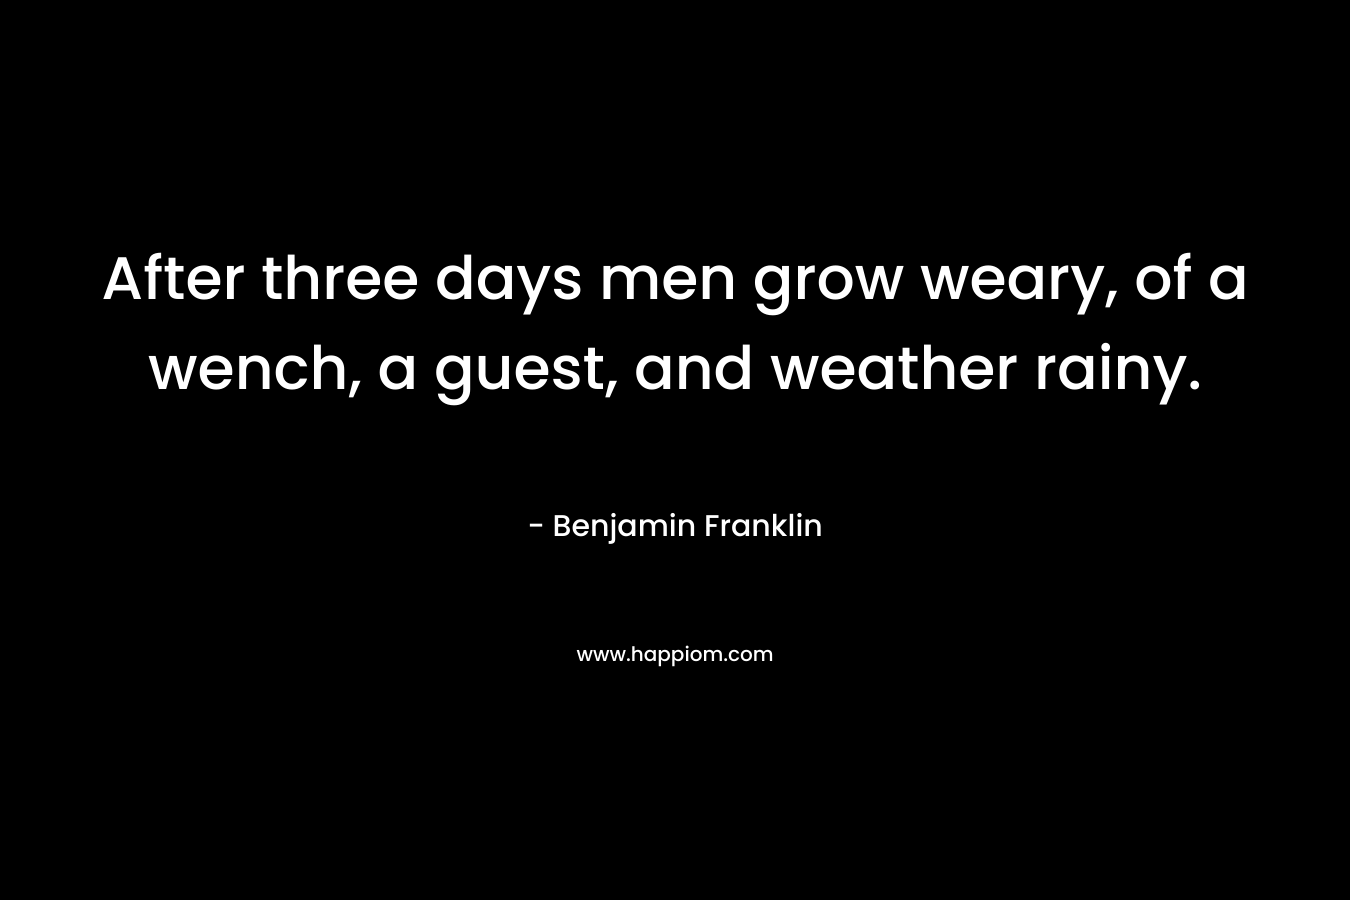 After three days men grow weary, of a wench, a guest, and weather rainy.